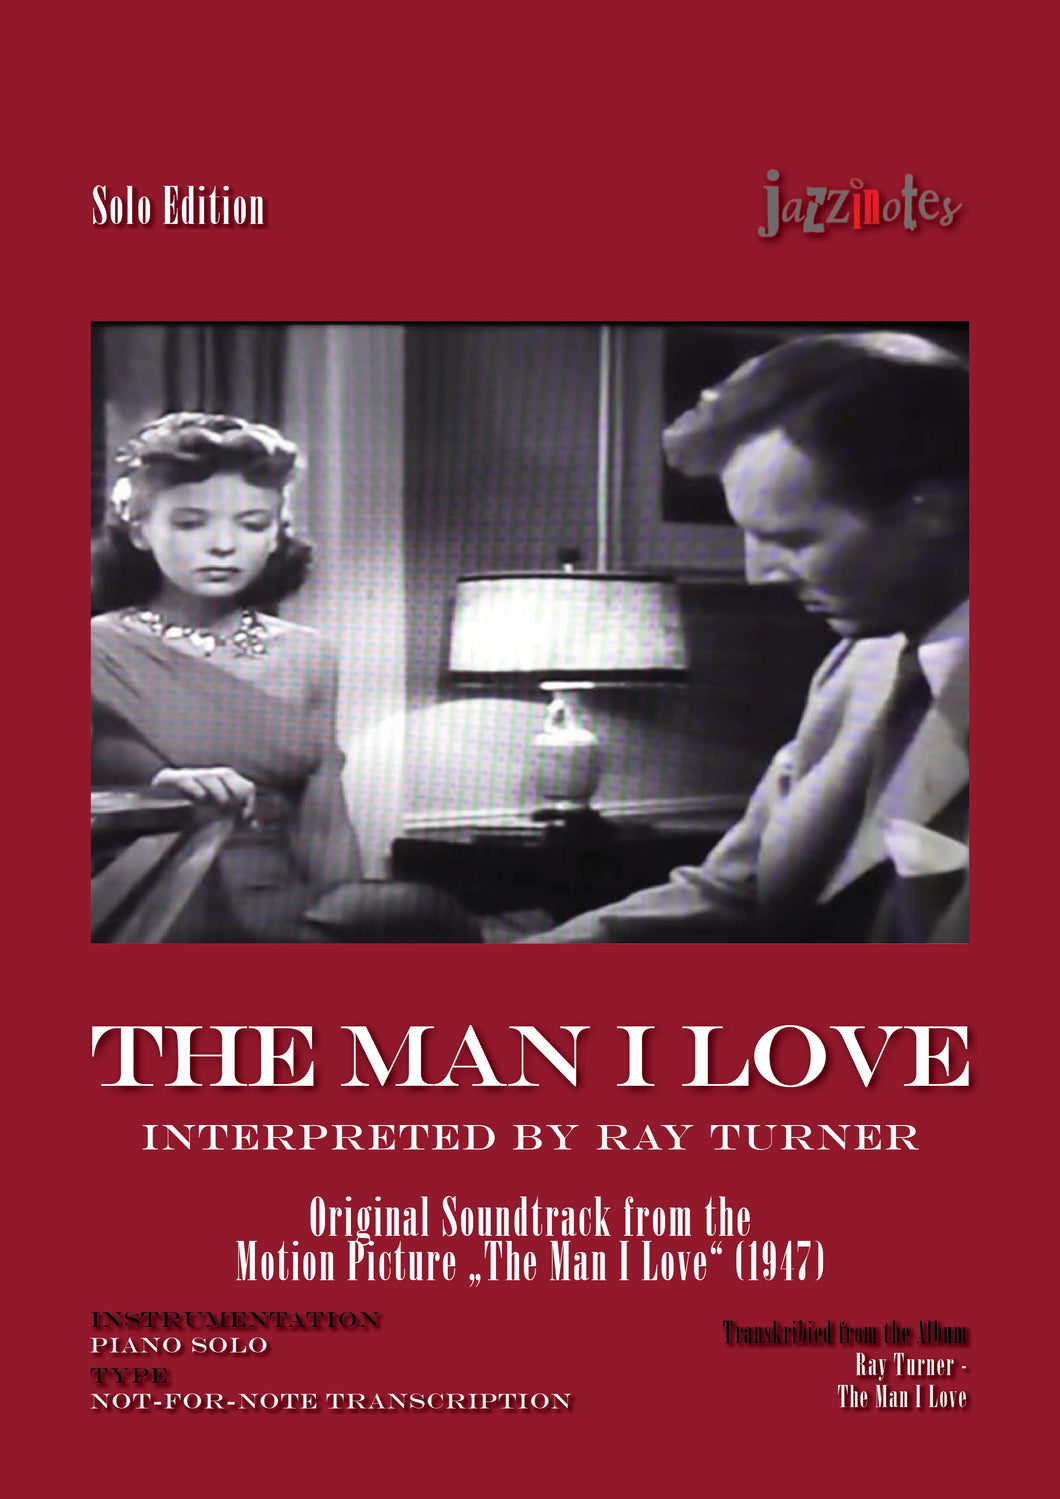 Turner, Ray: The Man I Love - Sheet Music Download